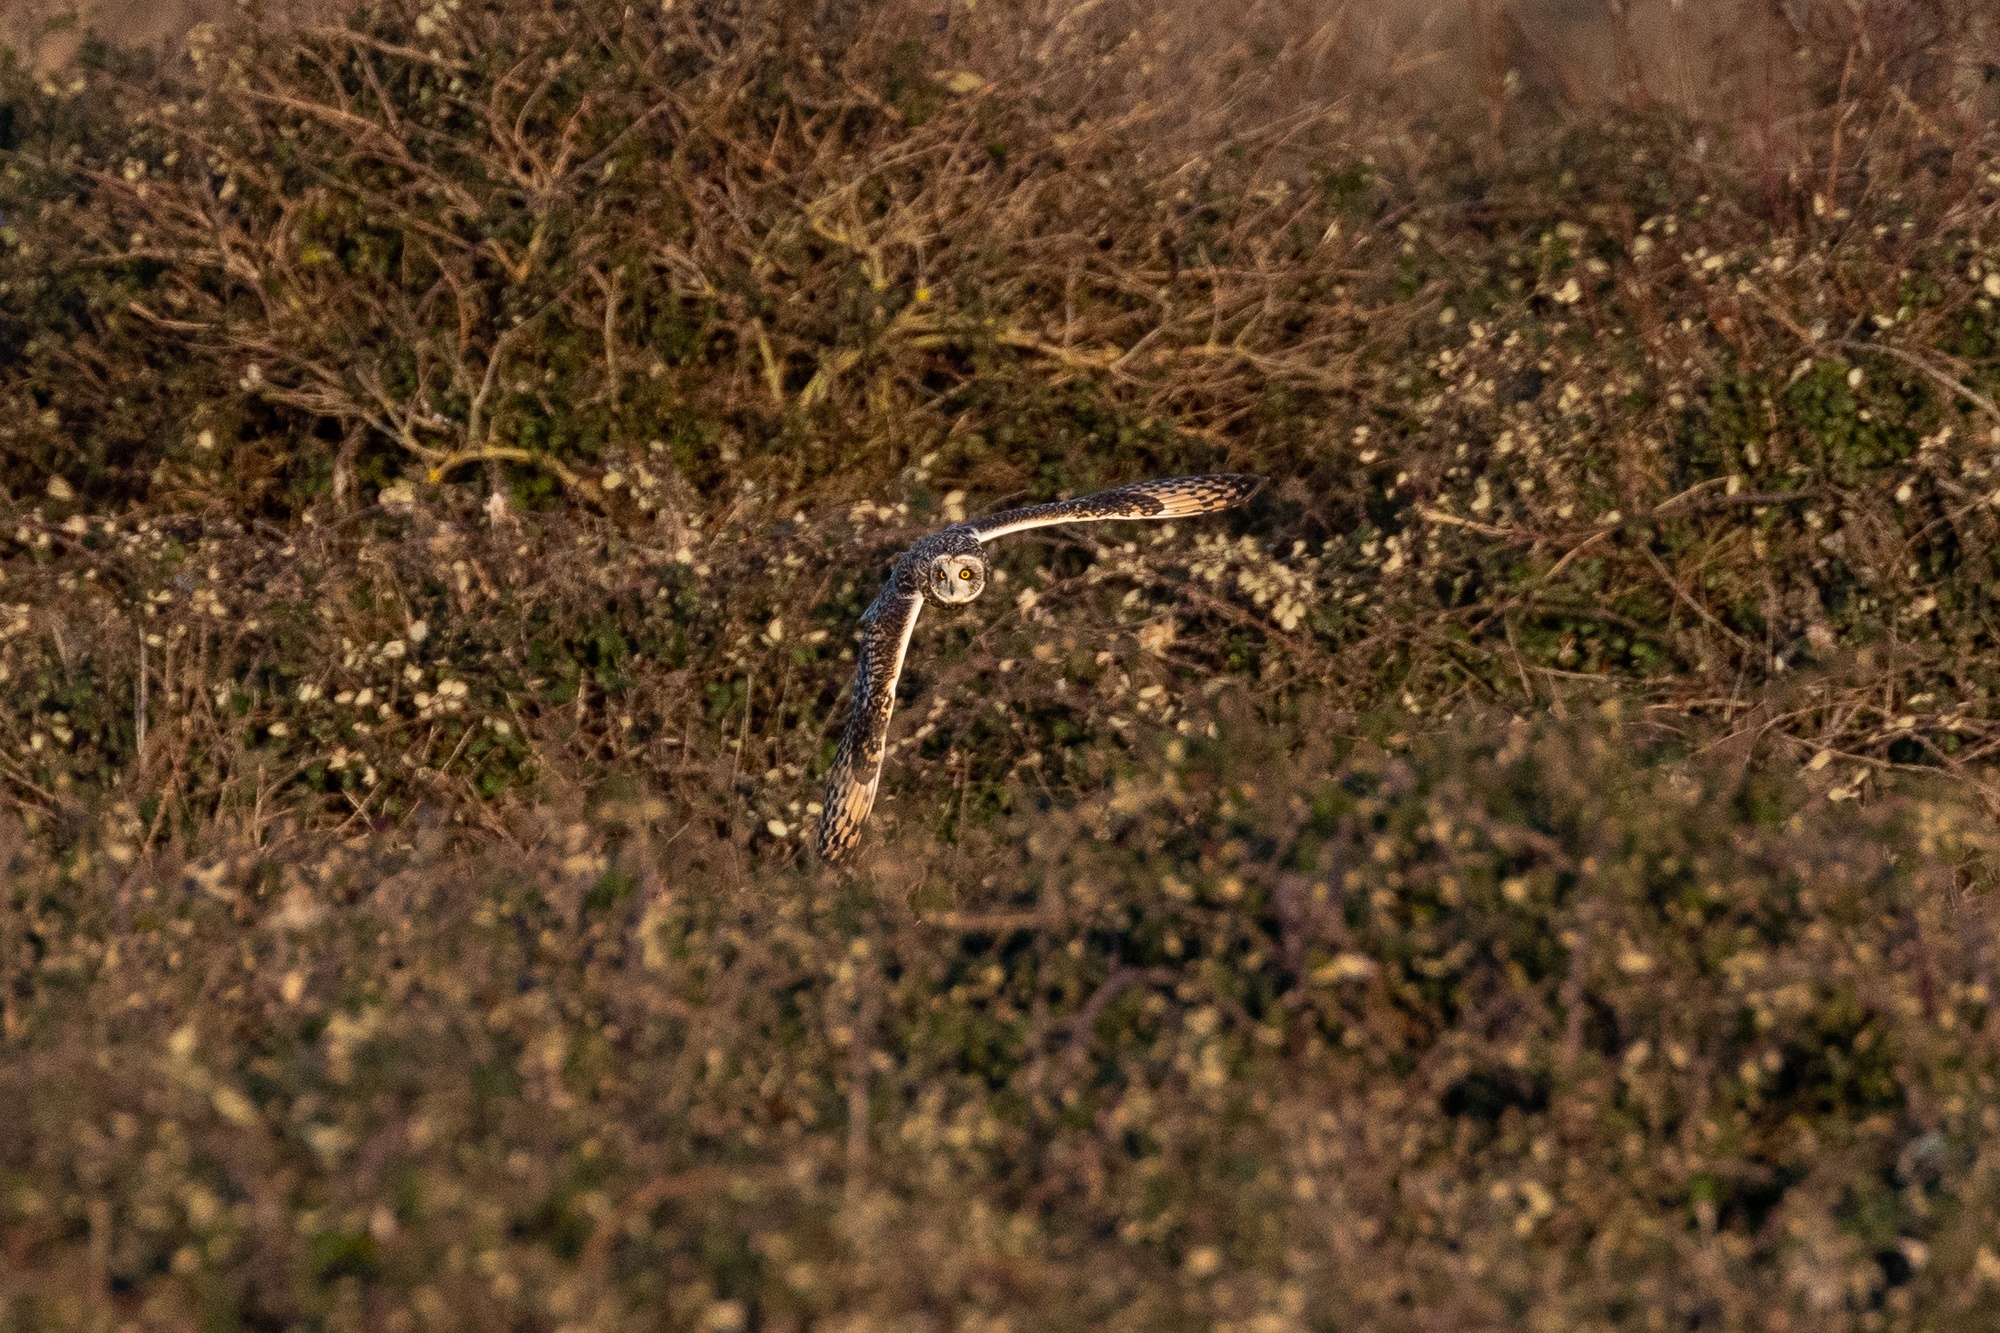 Short-eared owl flying between bushes. The owls body is pointing to right-hand of frame. The owls left wing is pointing downwards and it's right wing is parallel with the ground. The white leading edge of the owls winds is strikeing in contrast to the red of the owl. It's face is turned to the left-hand edge of the frame. The bushes are mostly made up of bushes that have some small green leaves and white flowers. The other bushes are mostly bare branched.